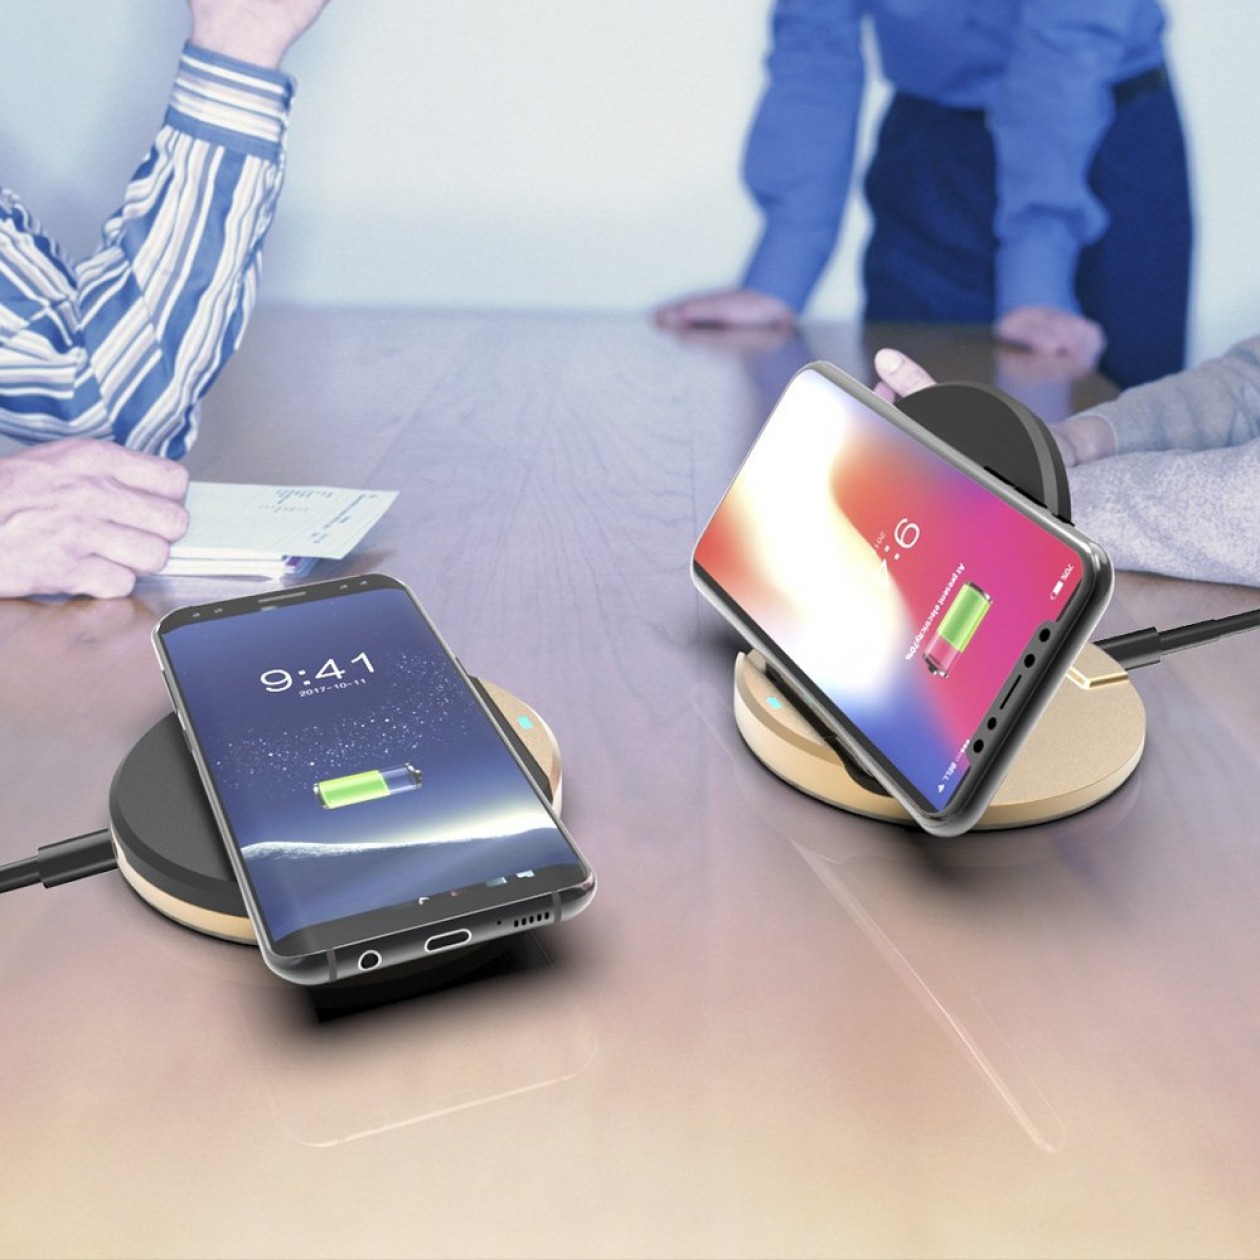 Fast Wireless Chargers Quick Charge, Standard Charge for iPhone Samsung and others